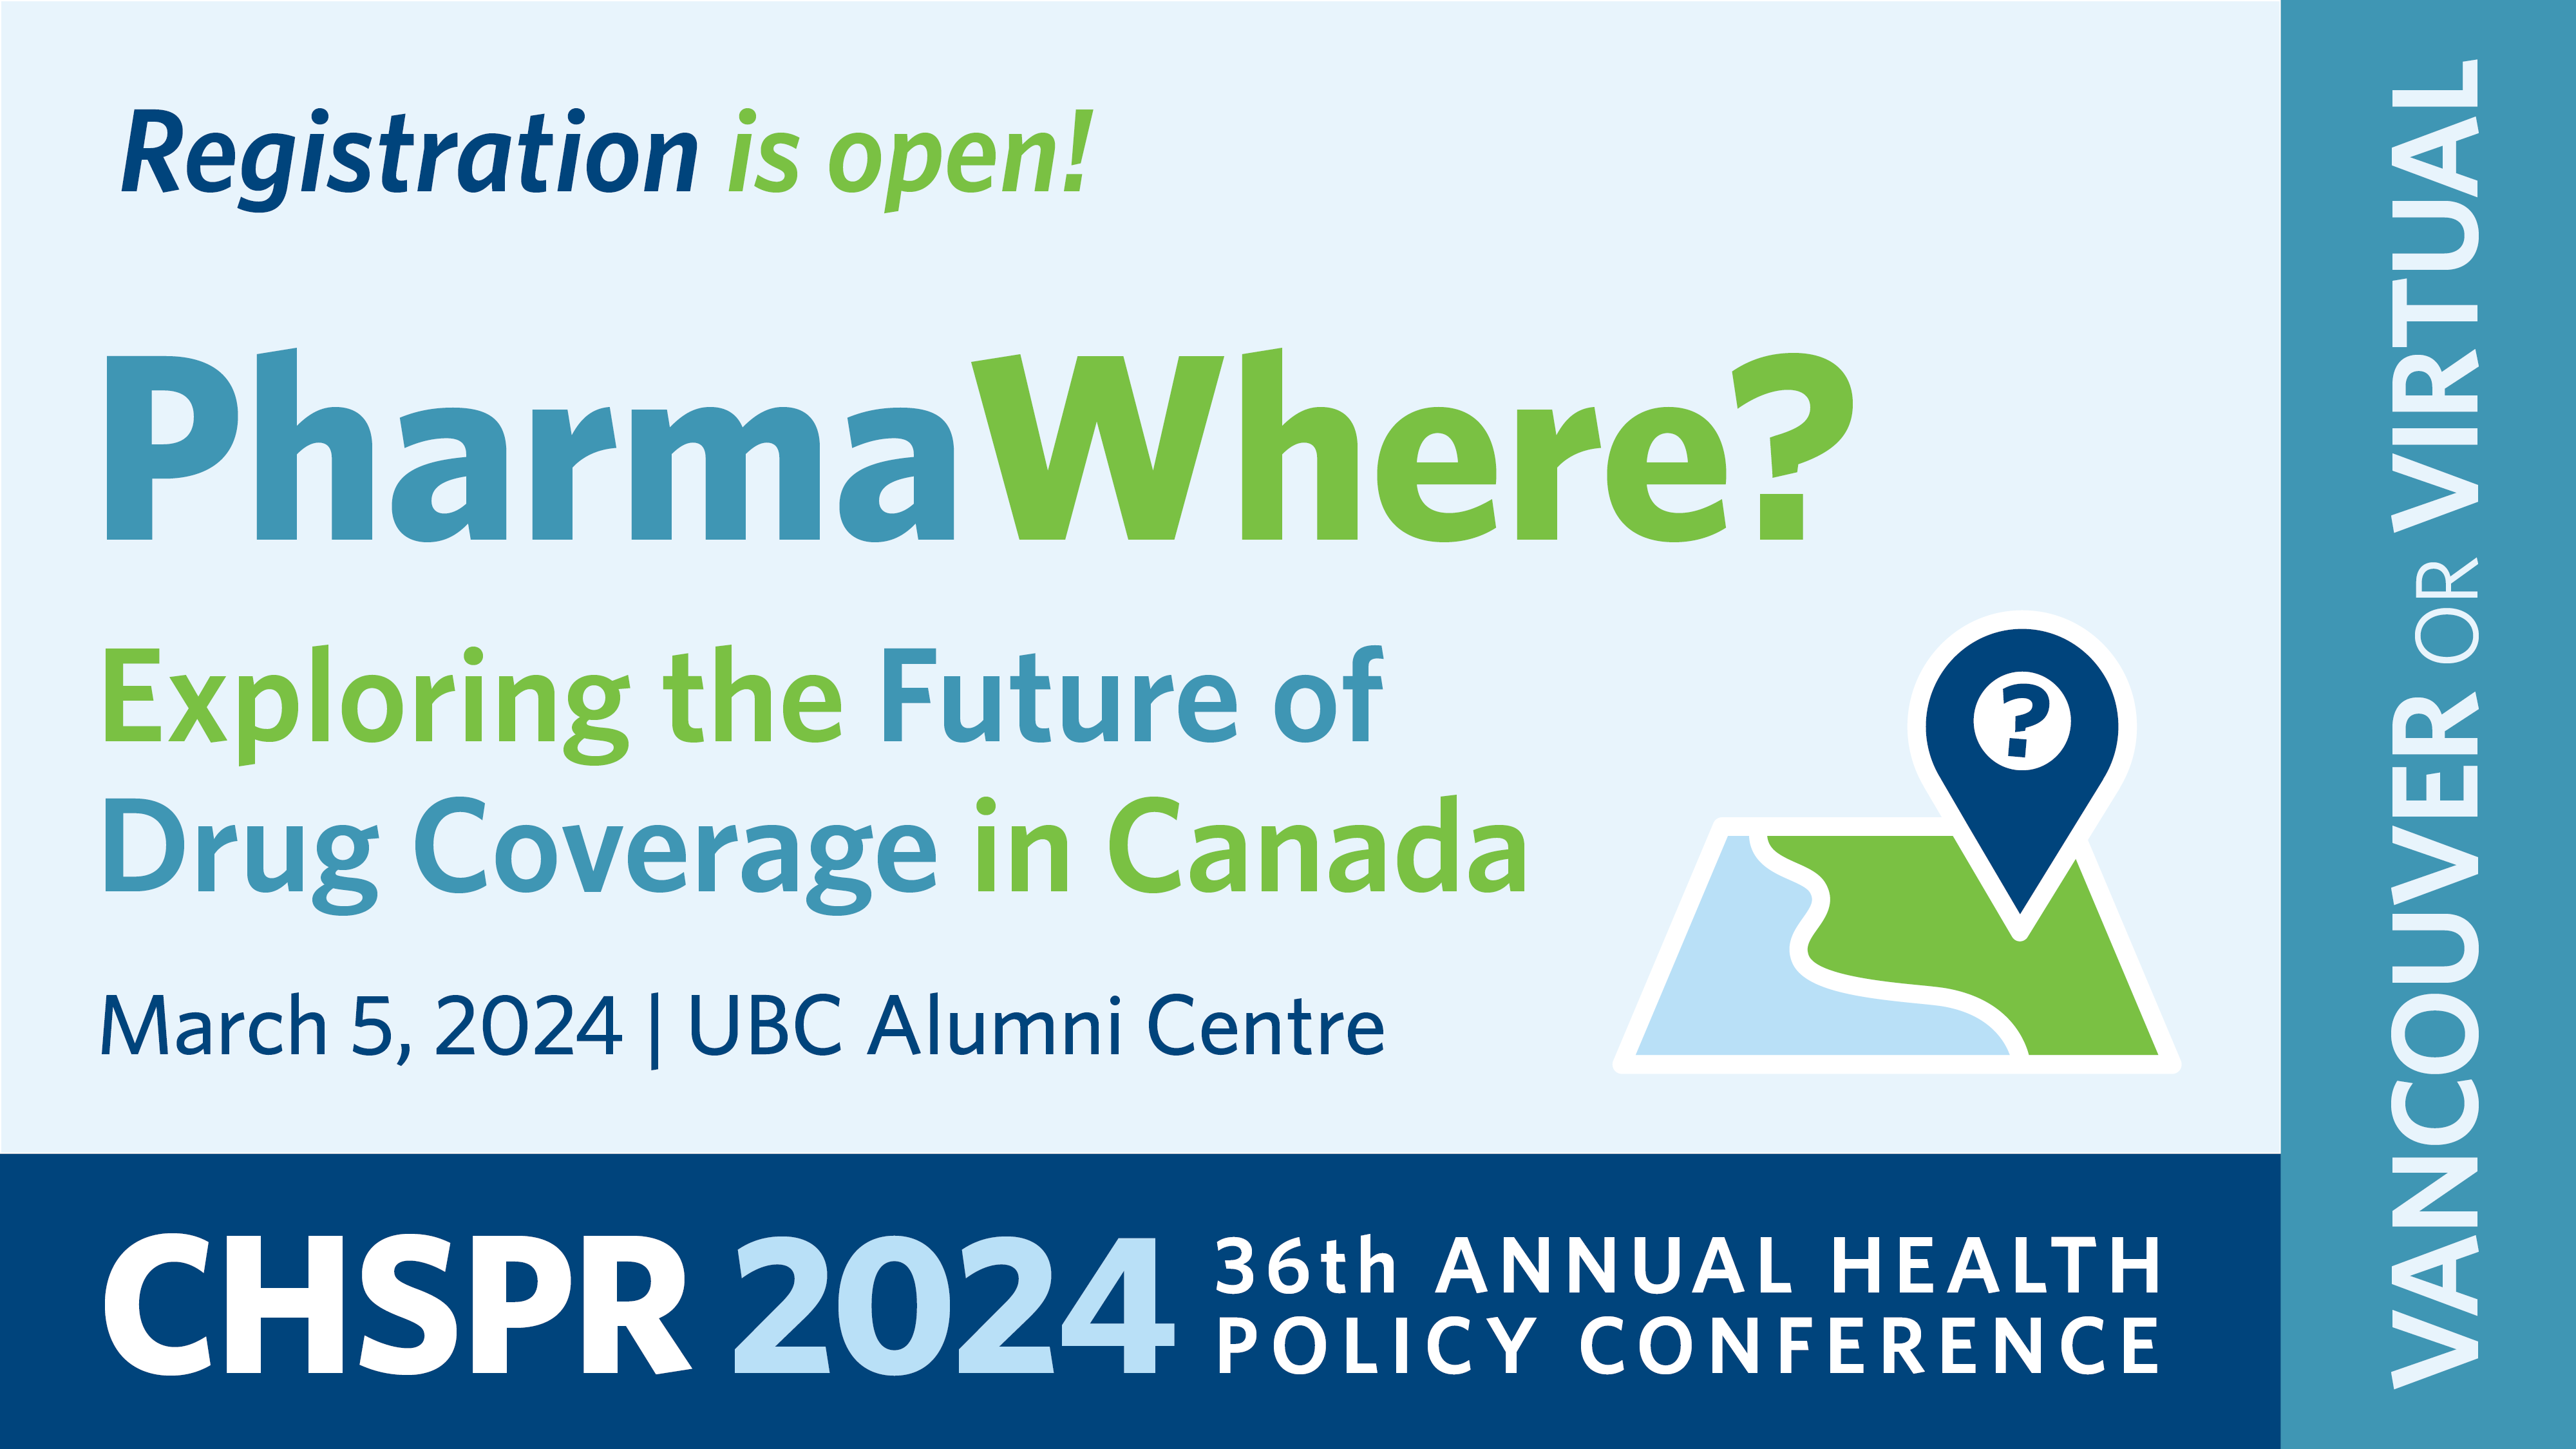 CHSPR Health Policy Conference: Exploring the Future of Drug Coverage in Canada